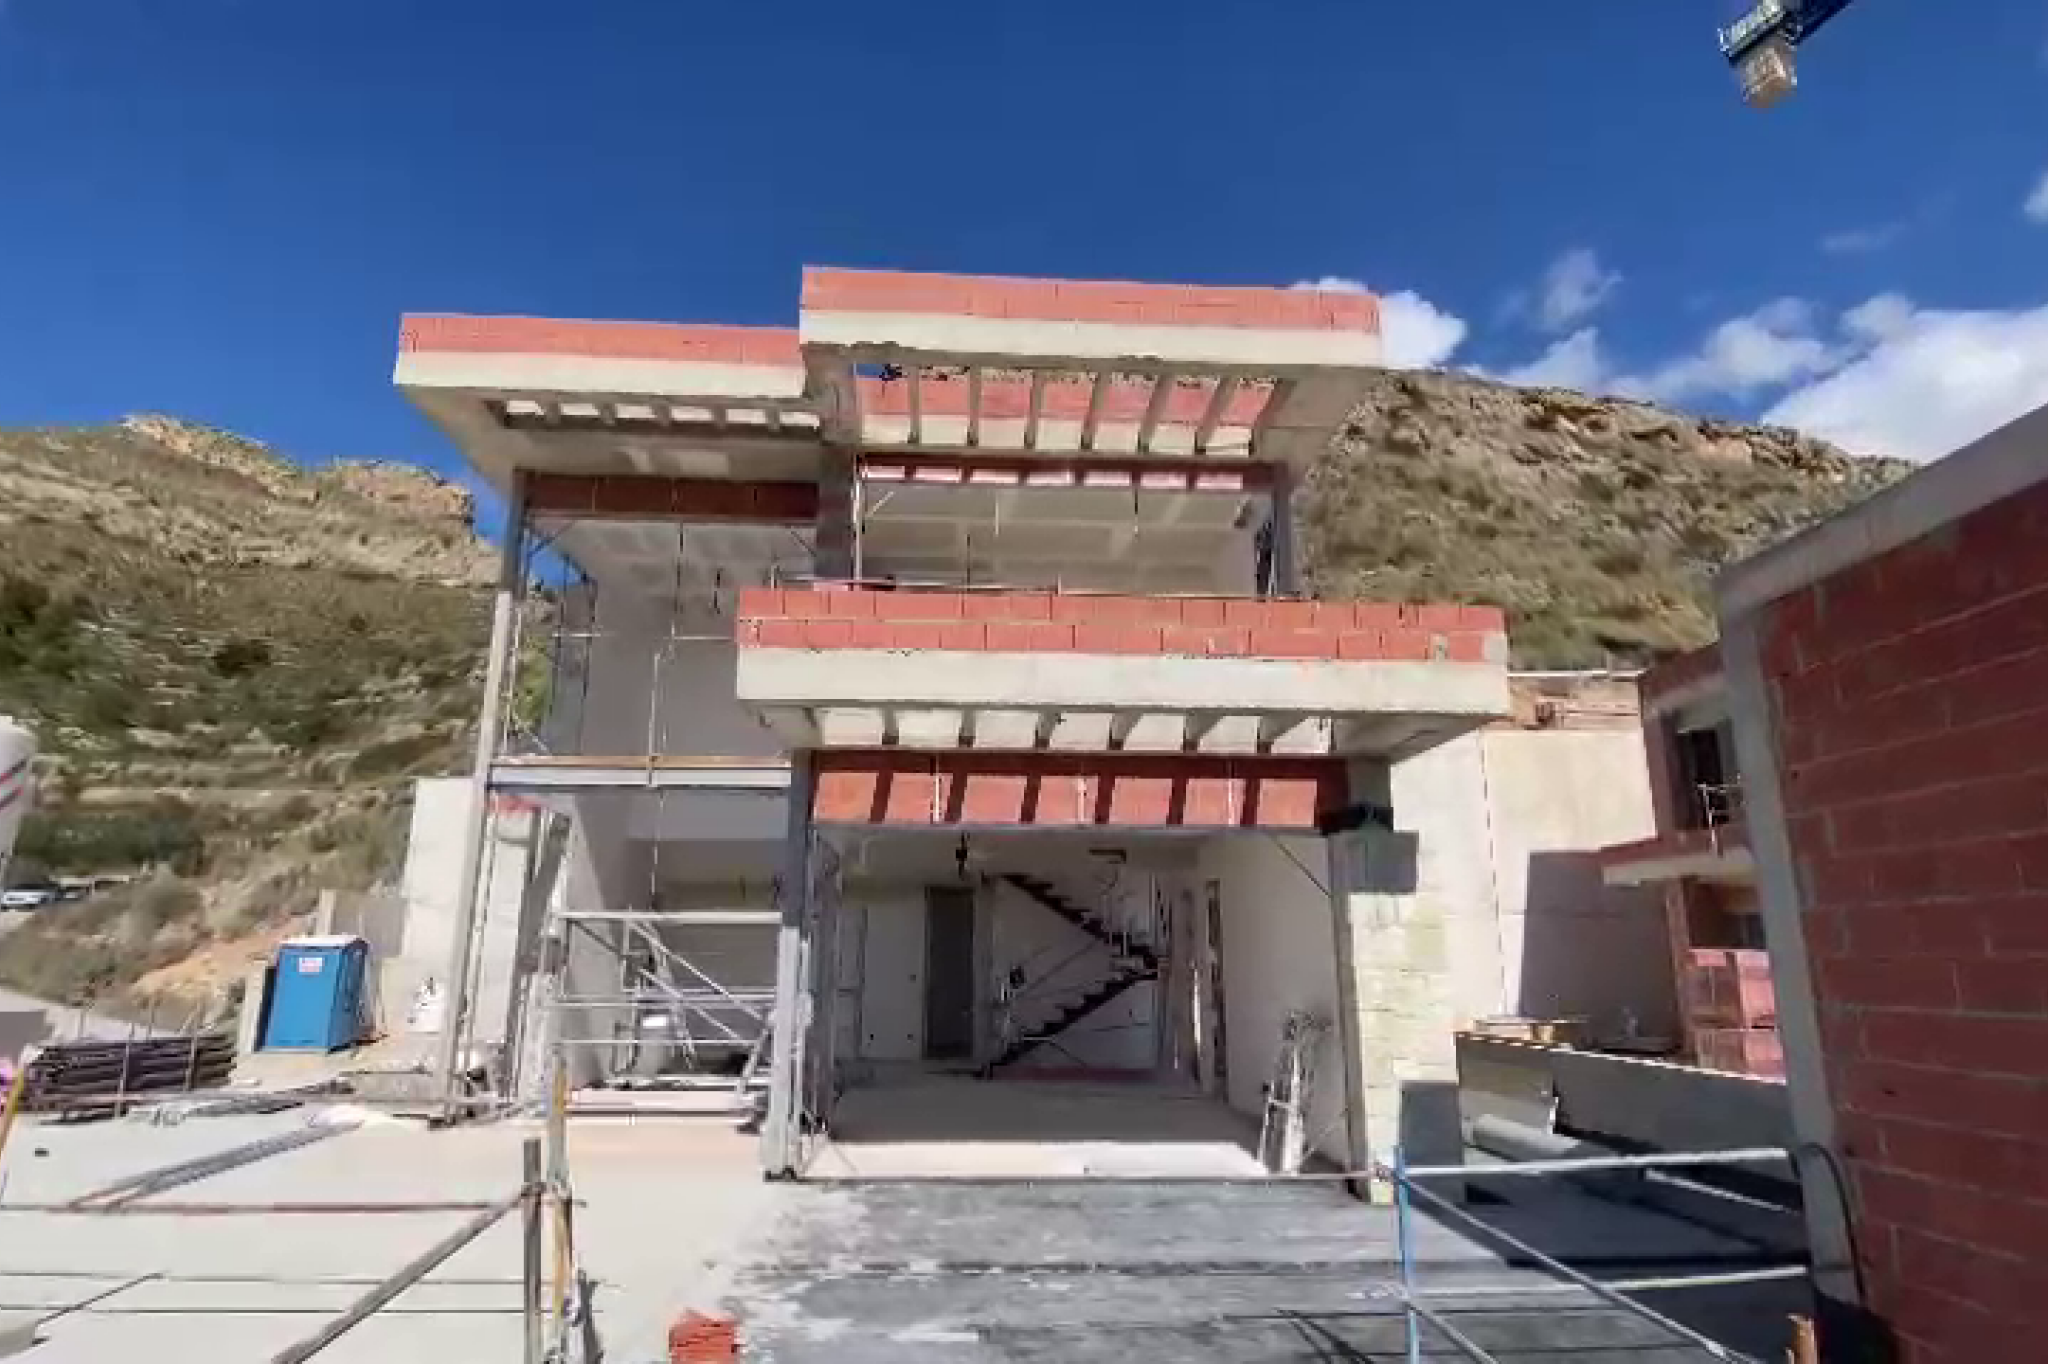 Res. SEAVIEW 3 - Construction continues on these detached villas in Sierra Cortina